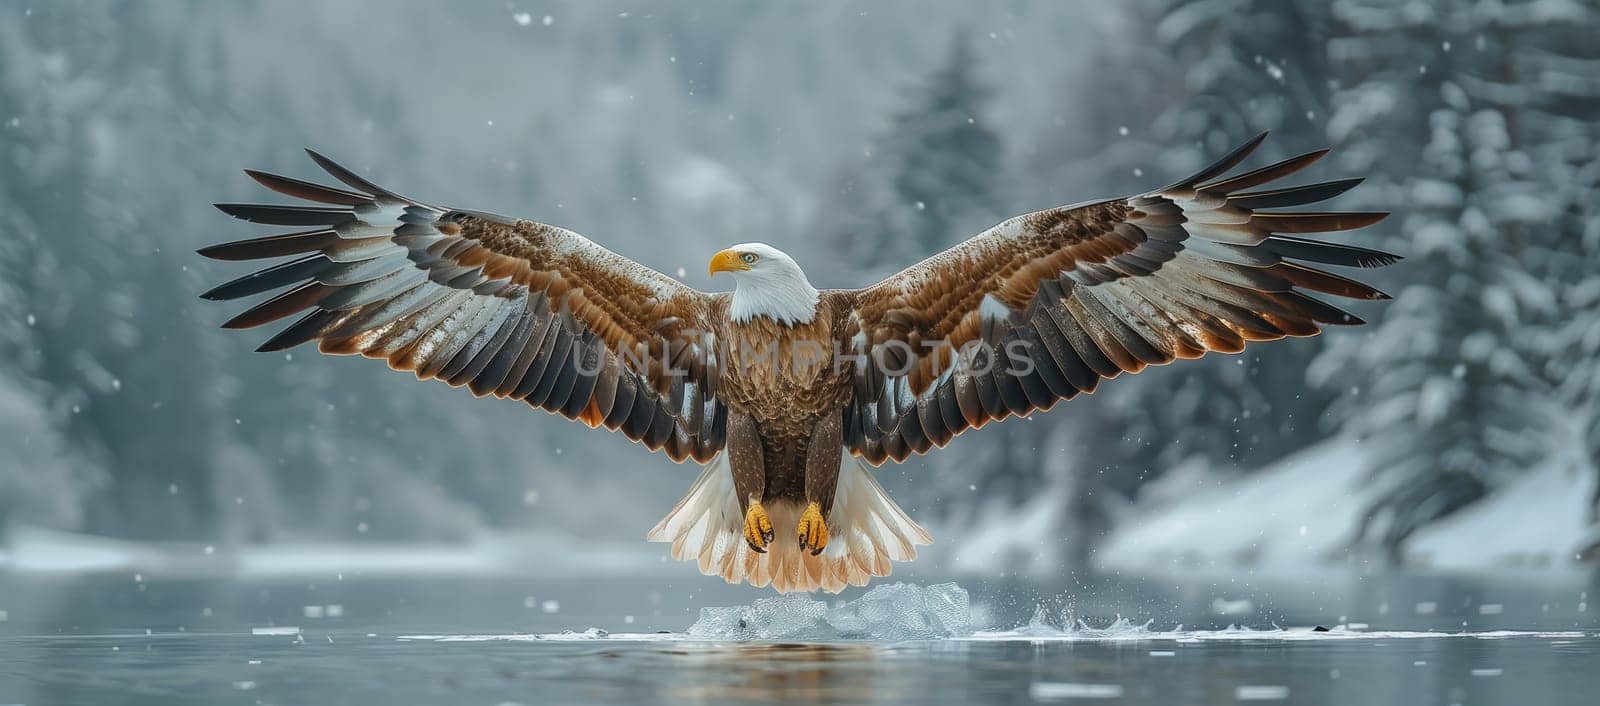 An Accipitridae bird of prey, known as a bald eagle from the Falconiformes family, is soaring over a body of water with its strong wings and sharp beak